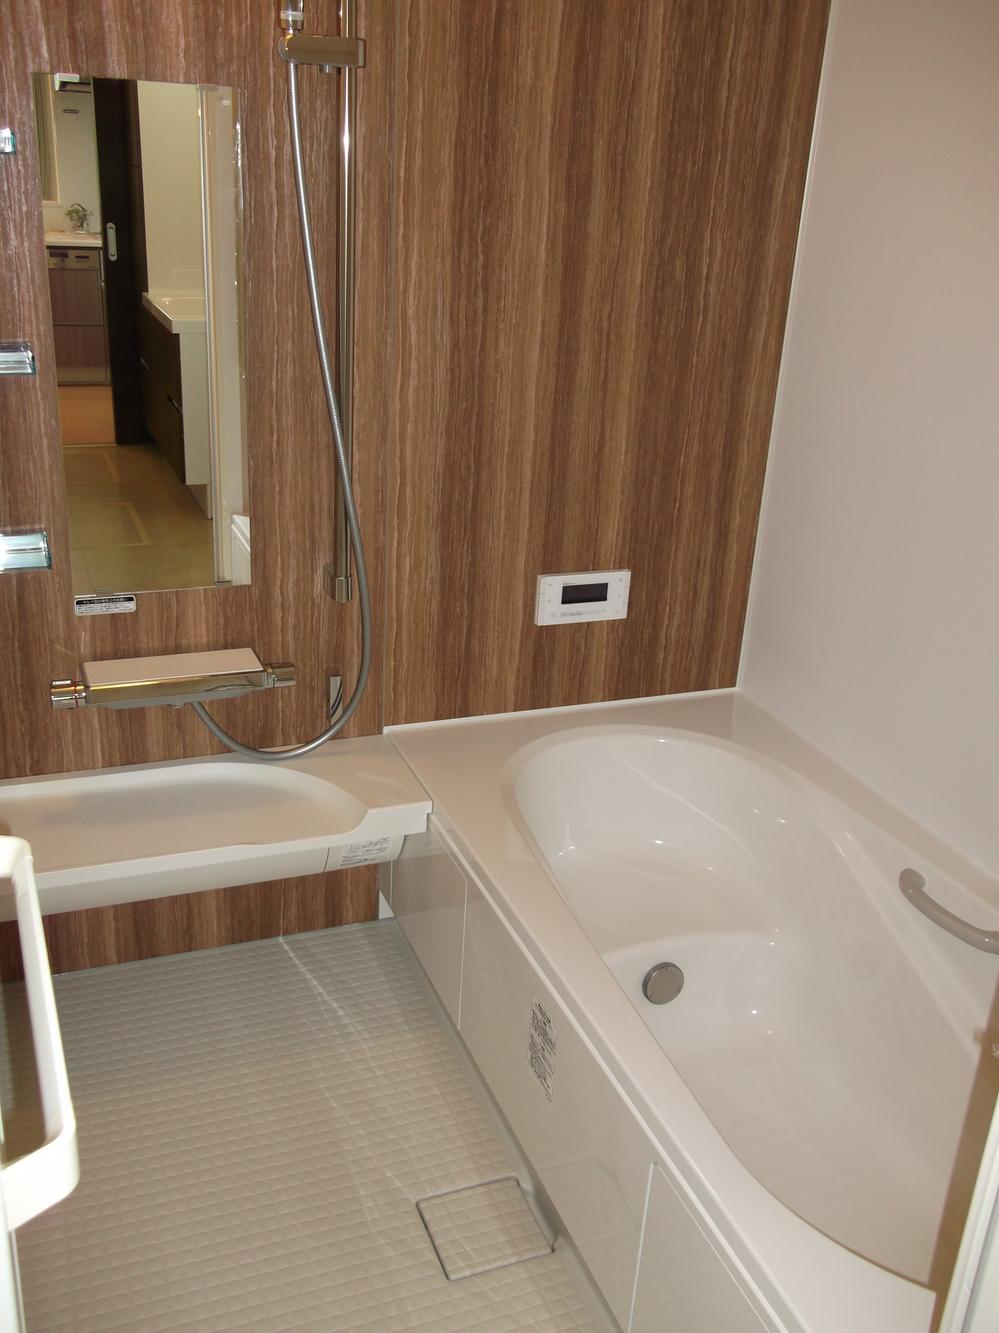 Bathroom. Unit bus which has been coordinated to match the room (C No. land)